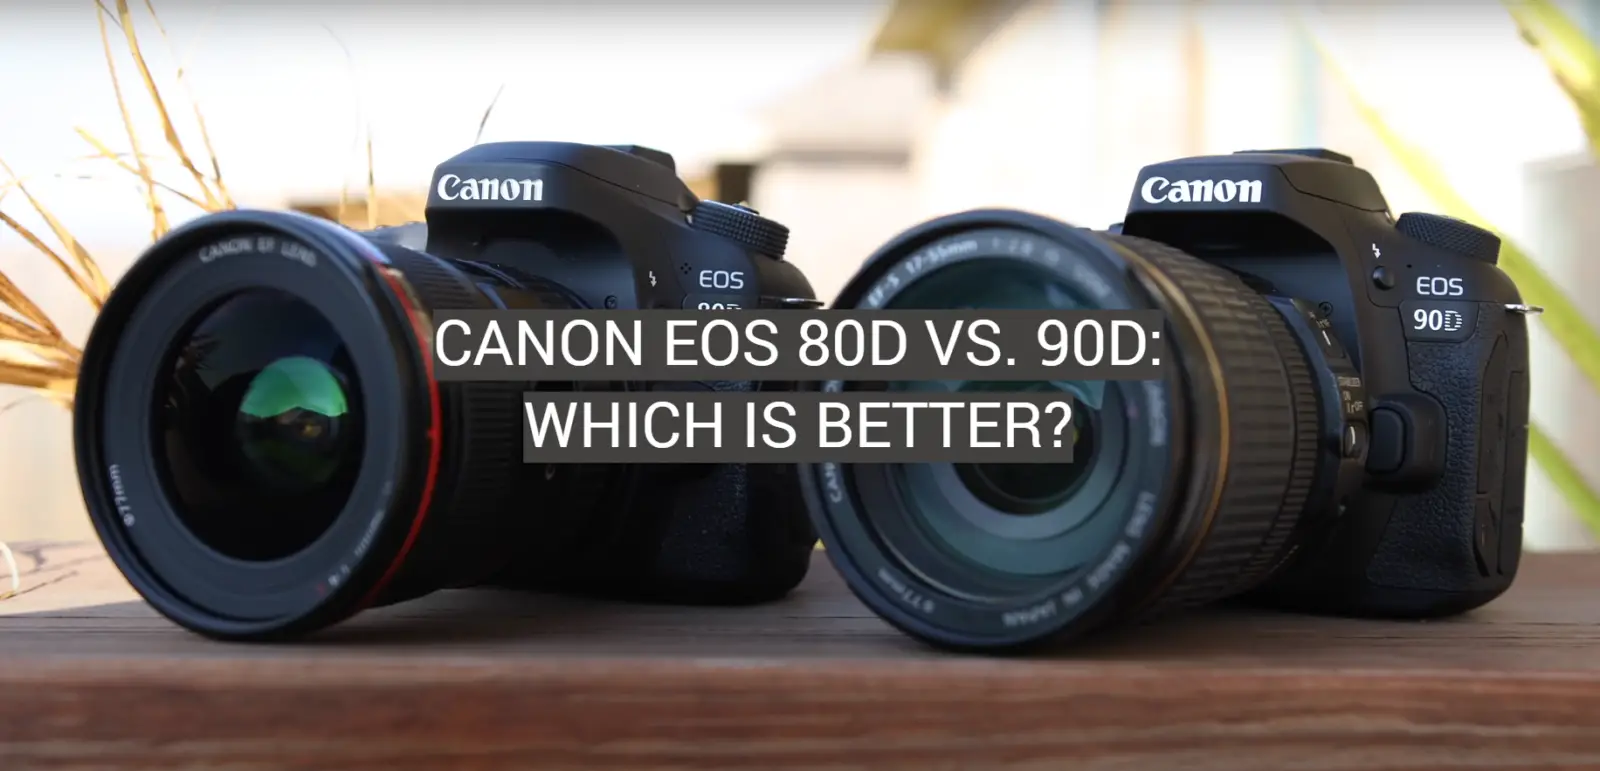 Canon EOS 80D vs. 90D: Which is Better?